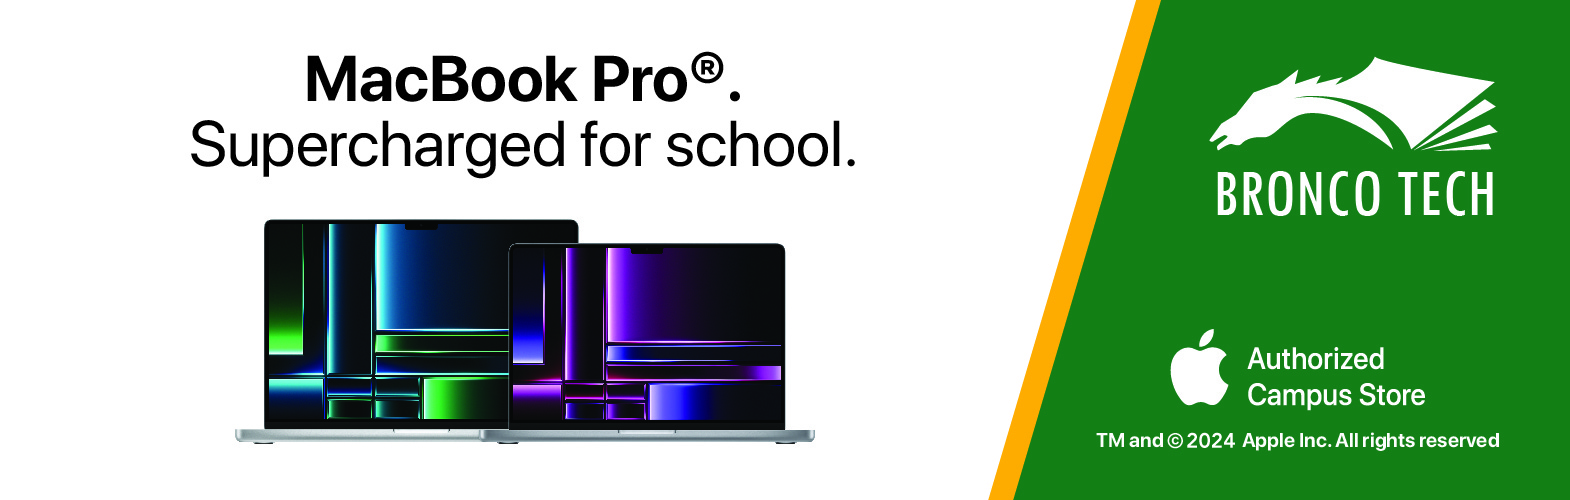 MacBook Pro - Supercharged for school.